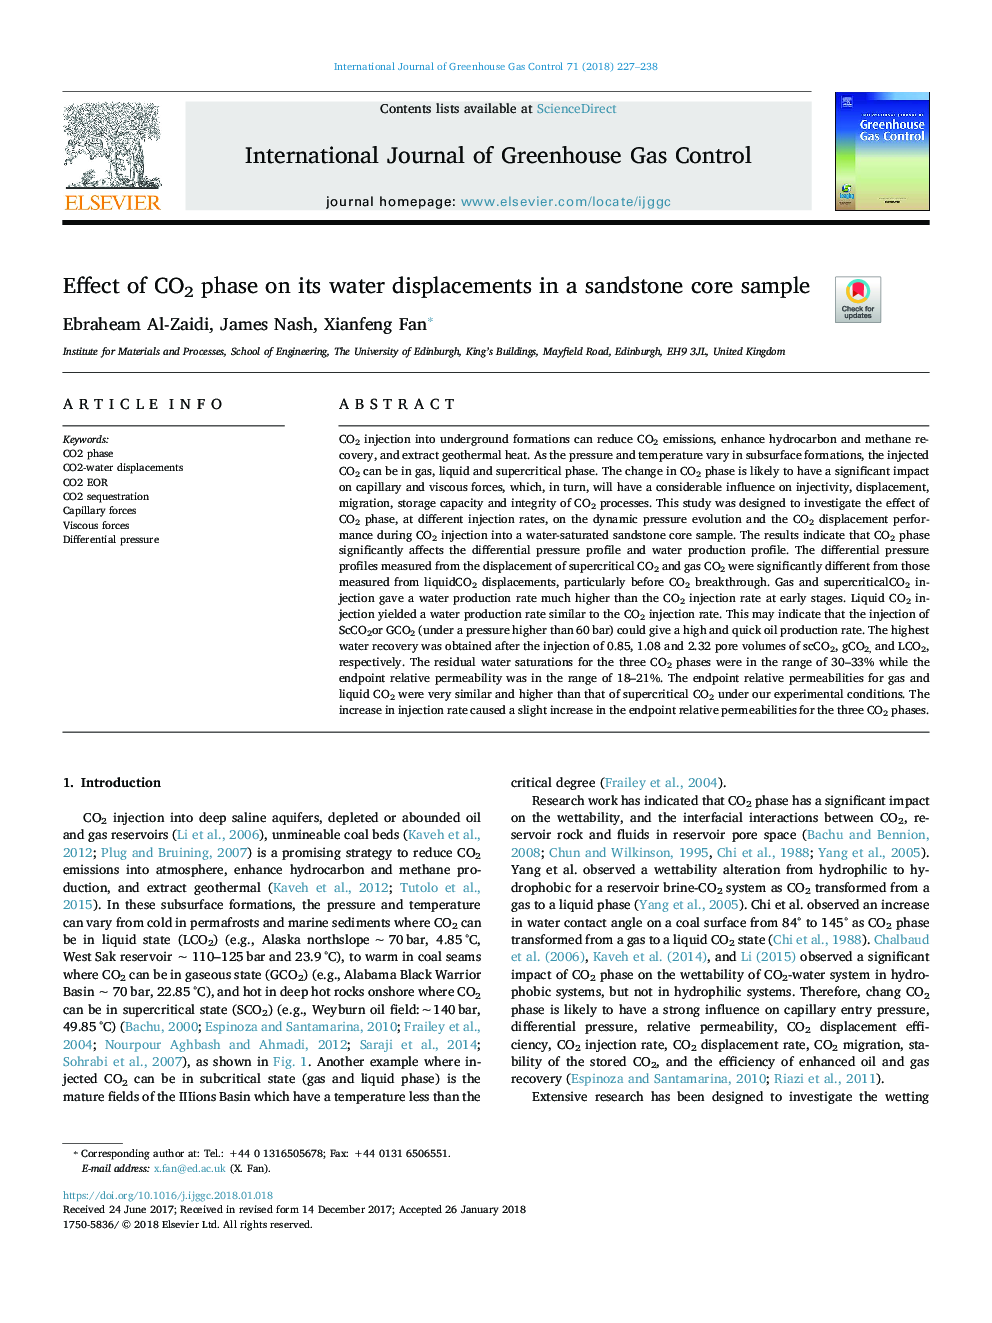 Effect of CO2 phase on its water displacements in a sandstone core sample